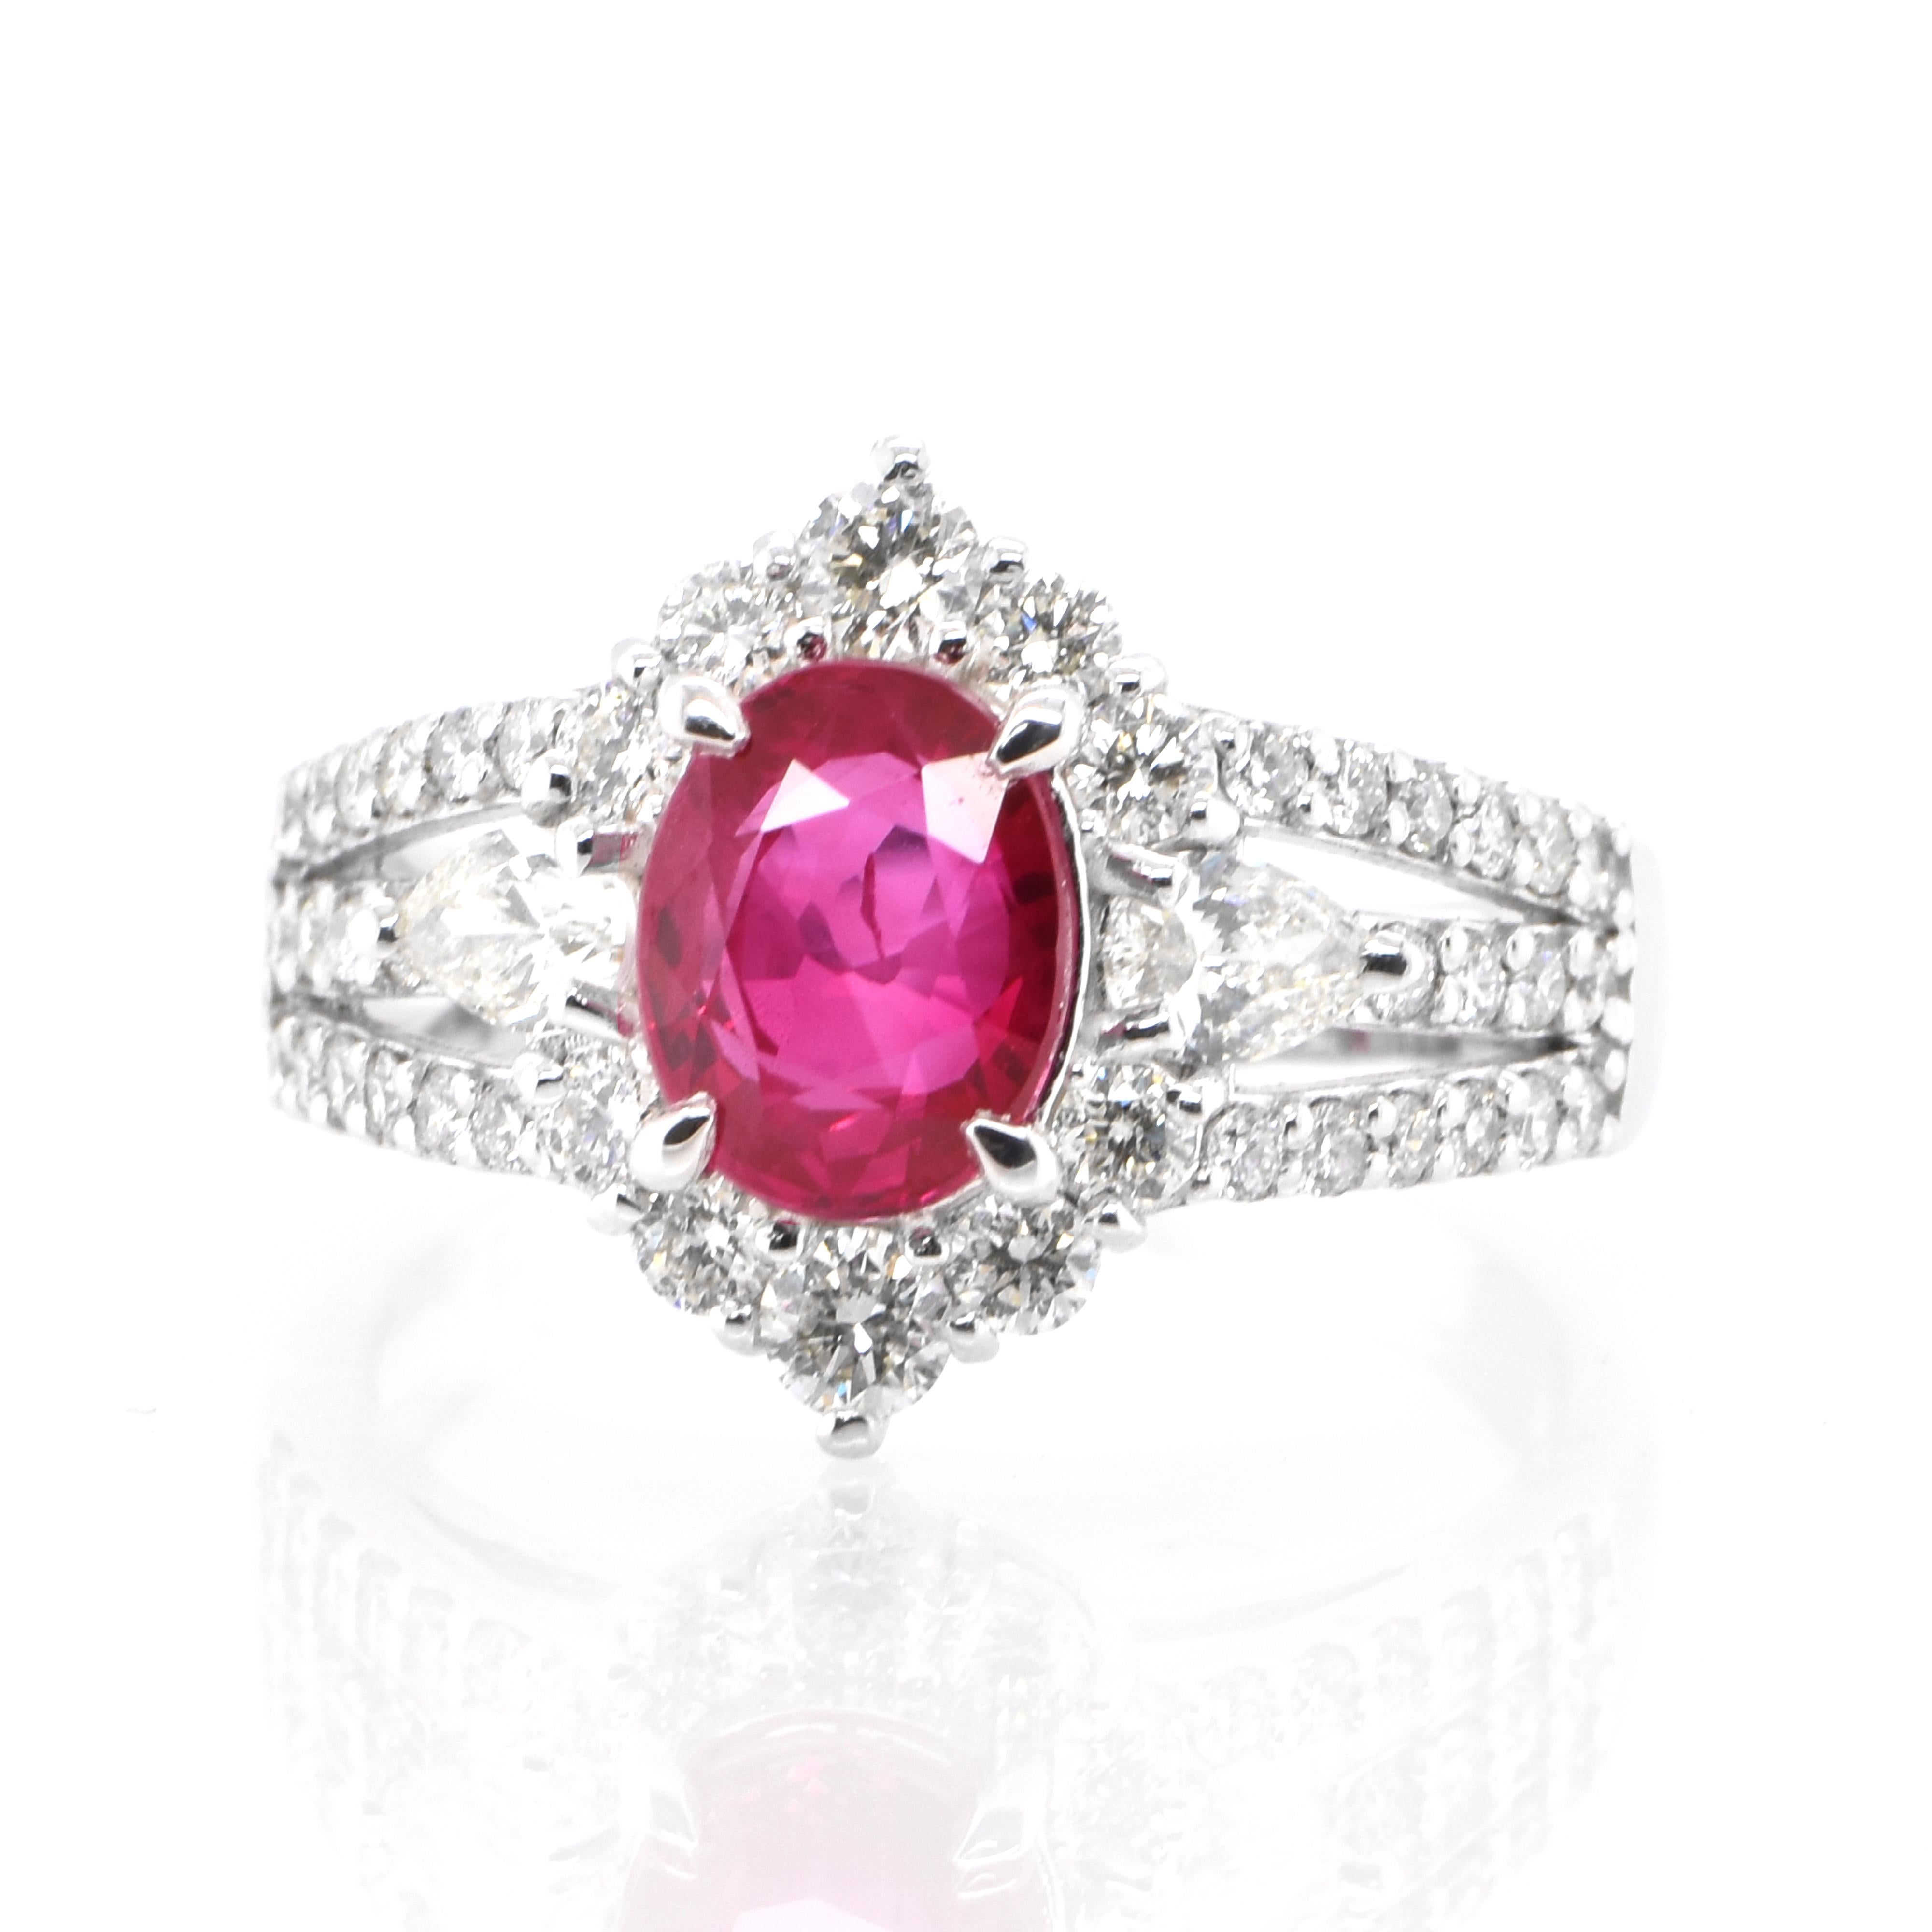 A beautiful ring set in Platinum featuring a GIA Certified 2.00 Carat Natural Burmese Ruby and 1.04 Carat Diamonds. Rubies are referred to as 